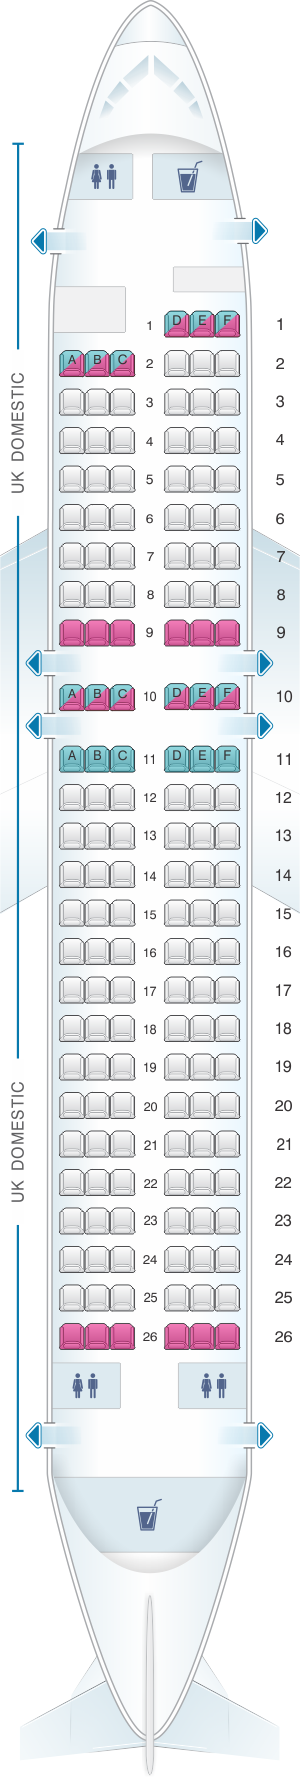 Seat map for British Airways Boeing B737 400 Domestic Layout